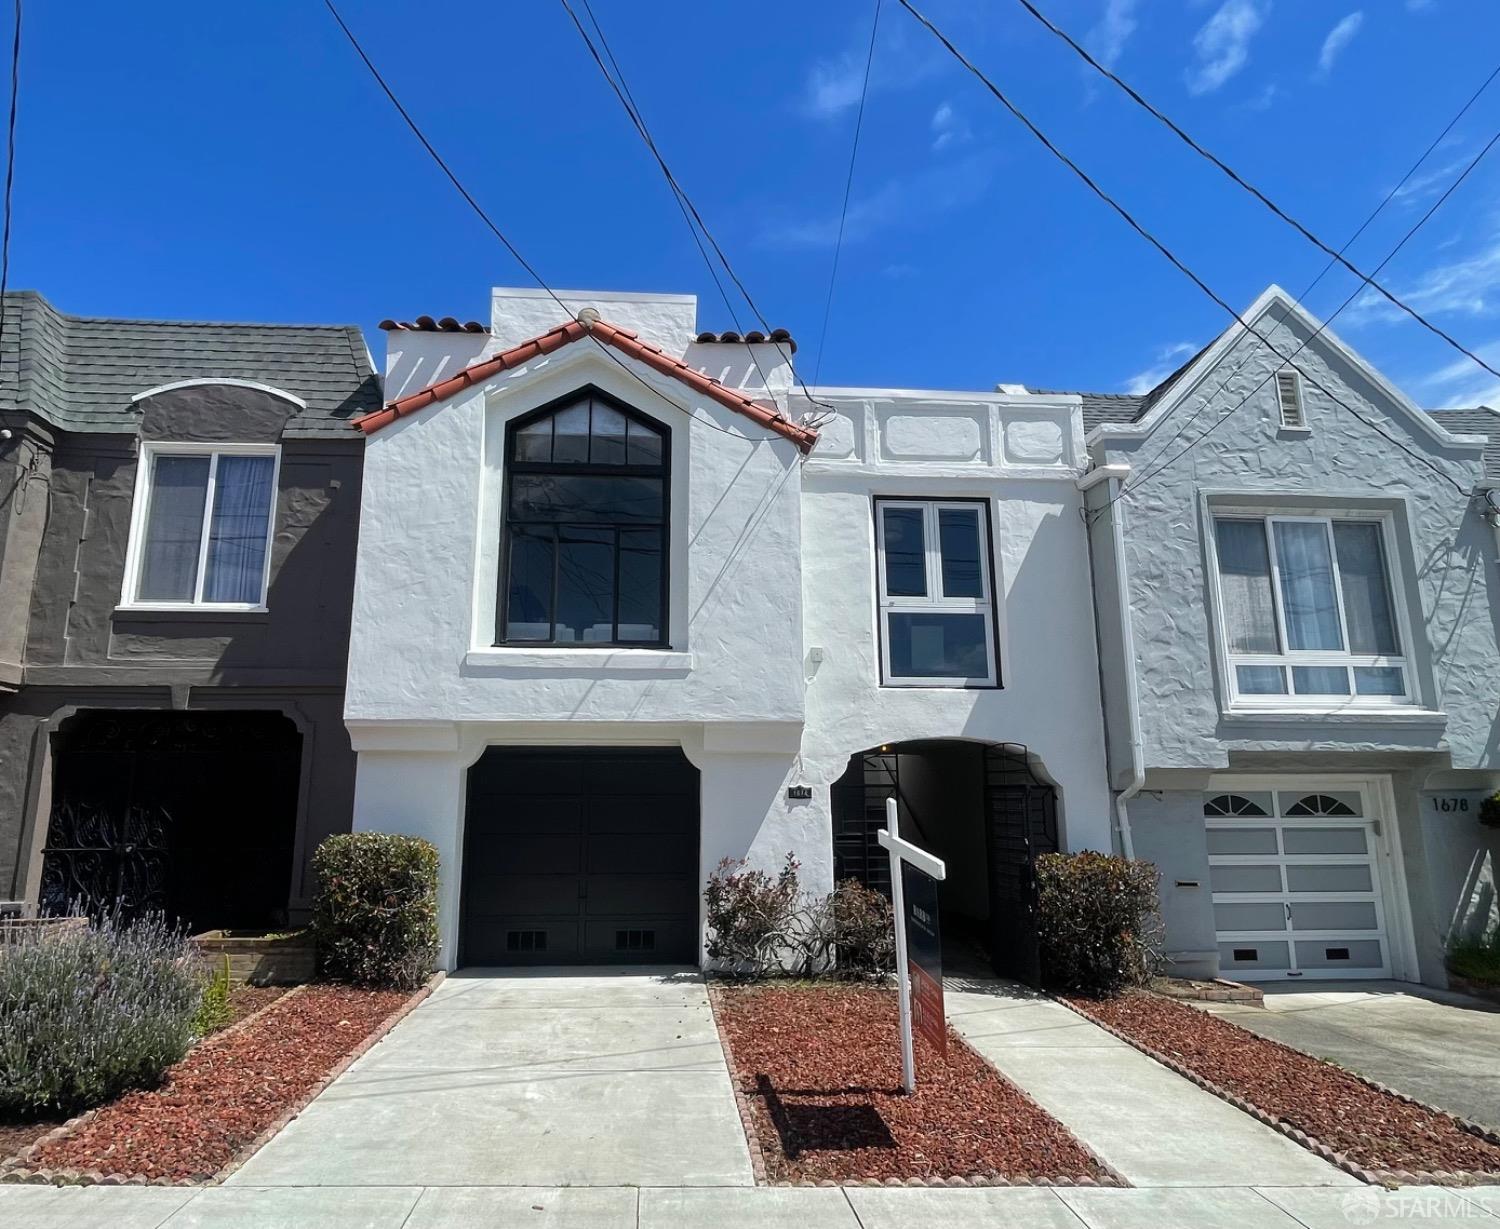 Photo of 1674 40th Ave in San Francisco, CA